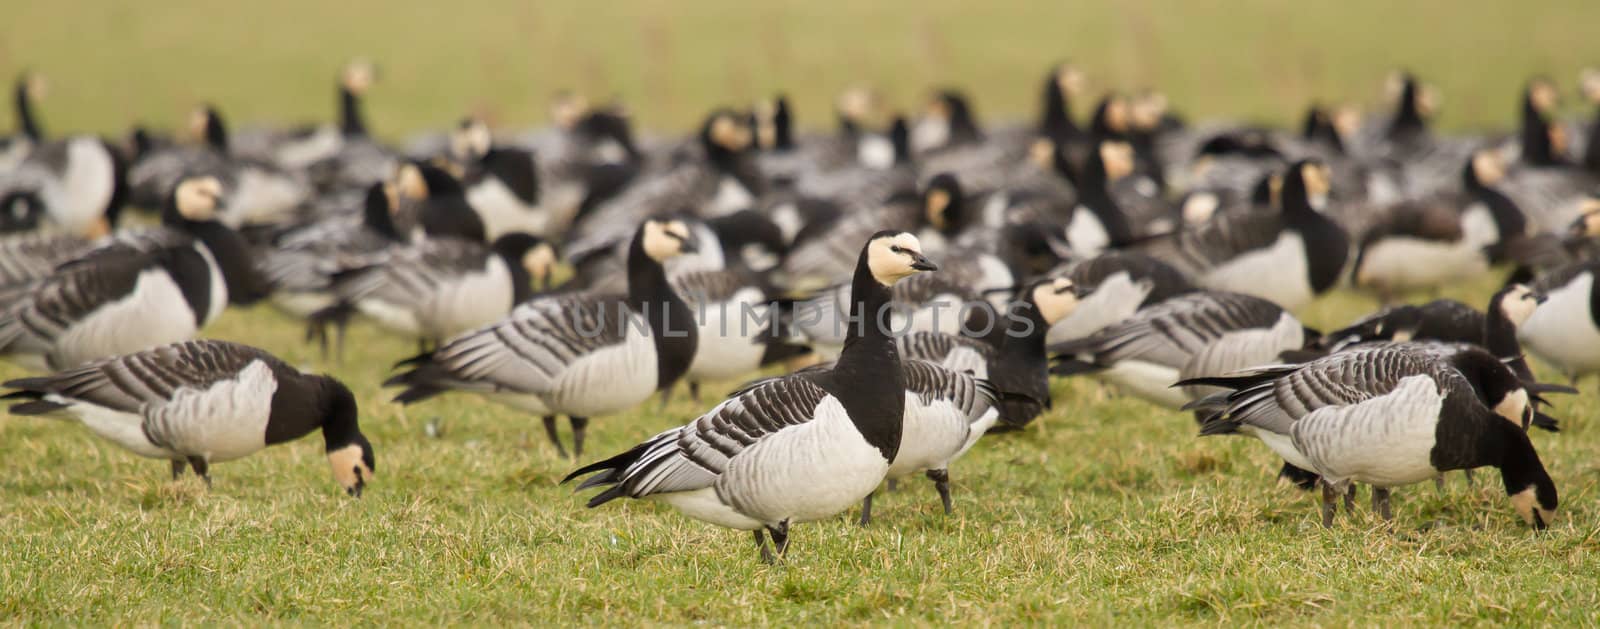 A group of barnacle geese by michaklootwijk